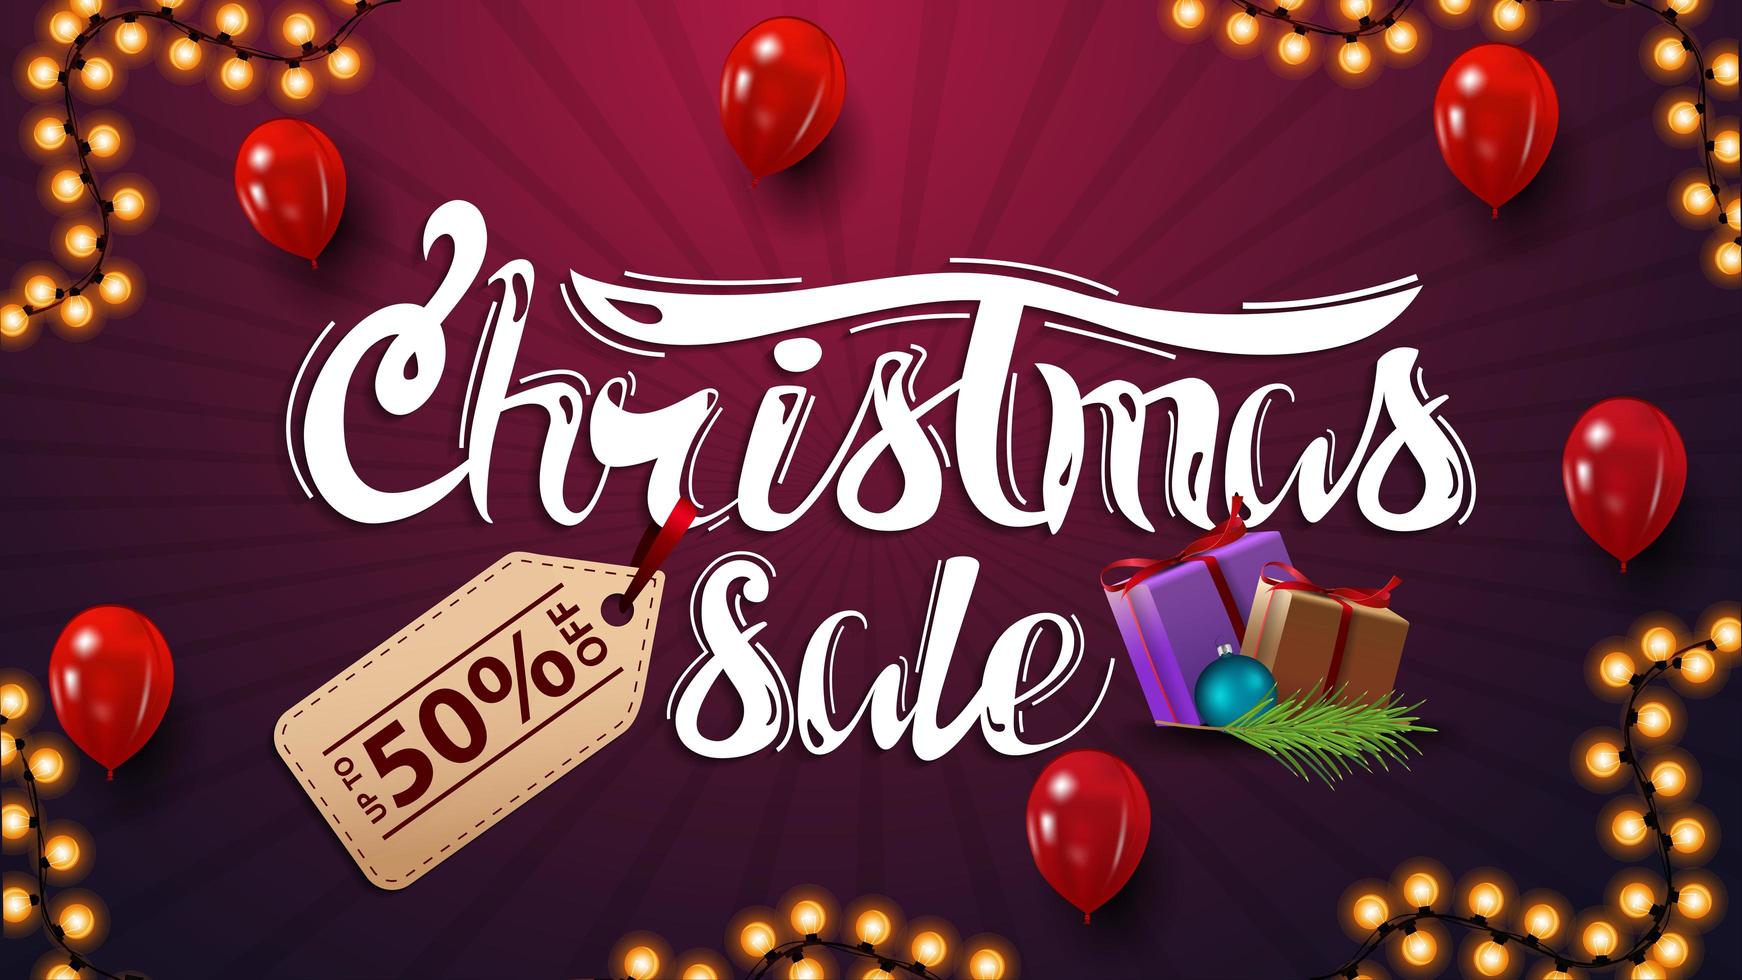 Christmas sale, discount banner with beautiful lettering with price tag. Discount purple banner with red balloons and Christmas presents vector